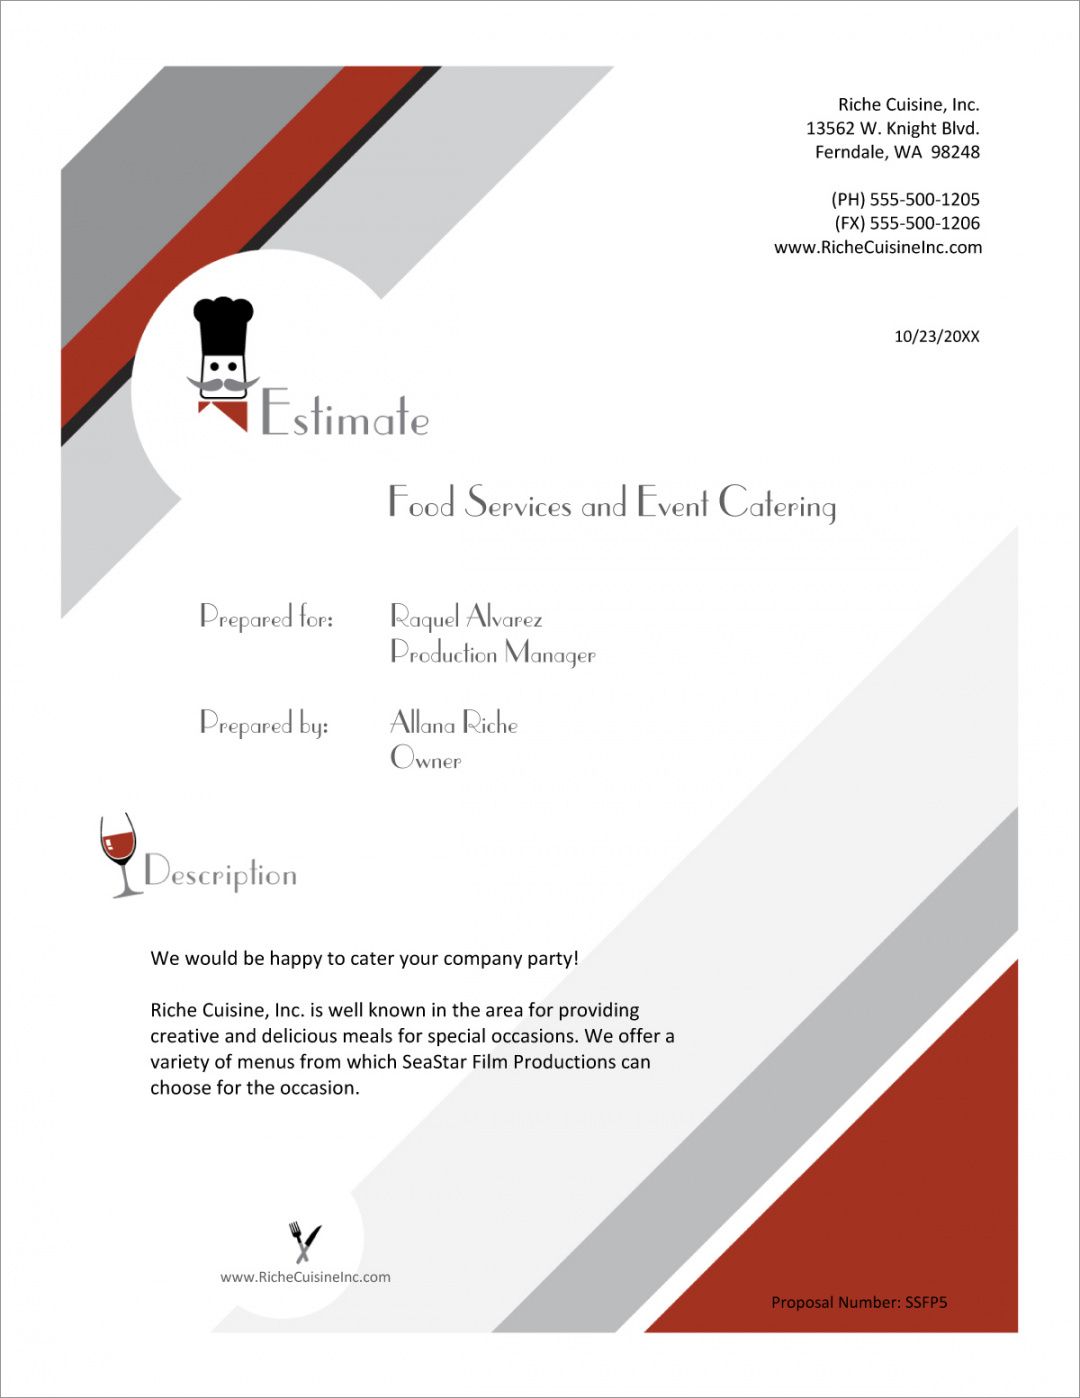 free food services catering sample proposal  5 steps catering proposal template pdf